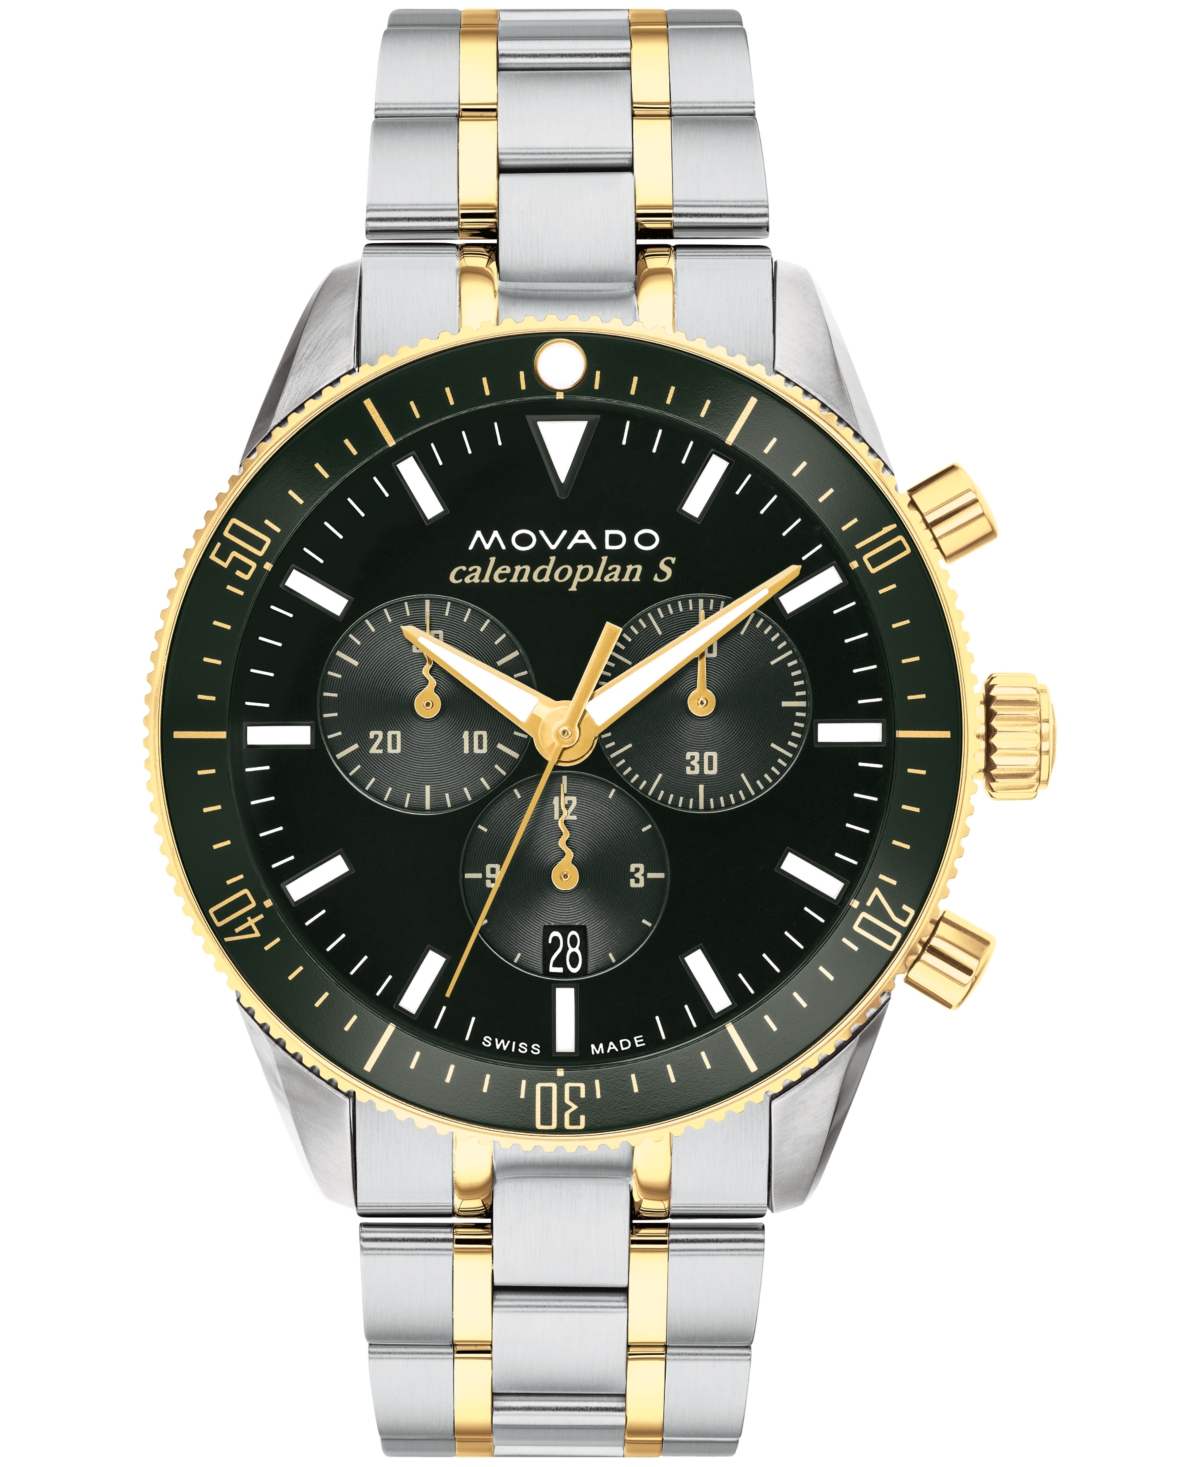 Movado Men's Calendoplan S Swiss Quartz Chronograph Two Tone Stainless Steel Watch 42mm In Two-tone